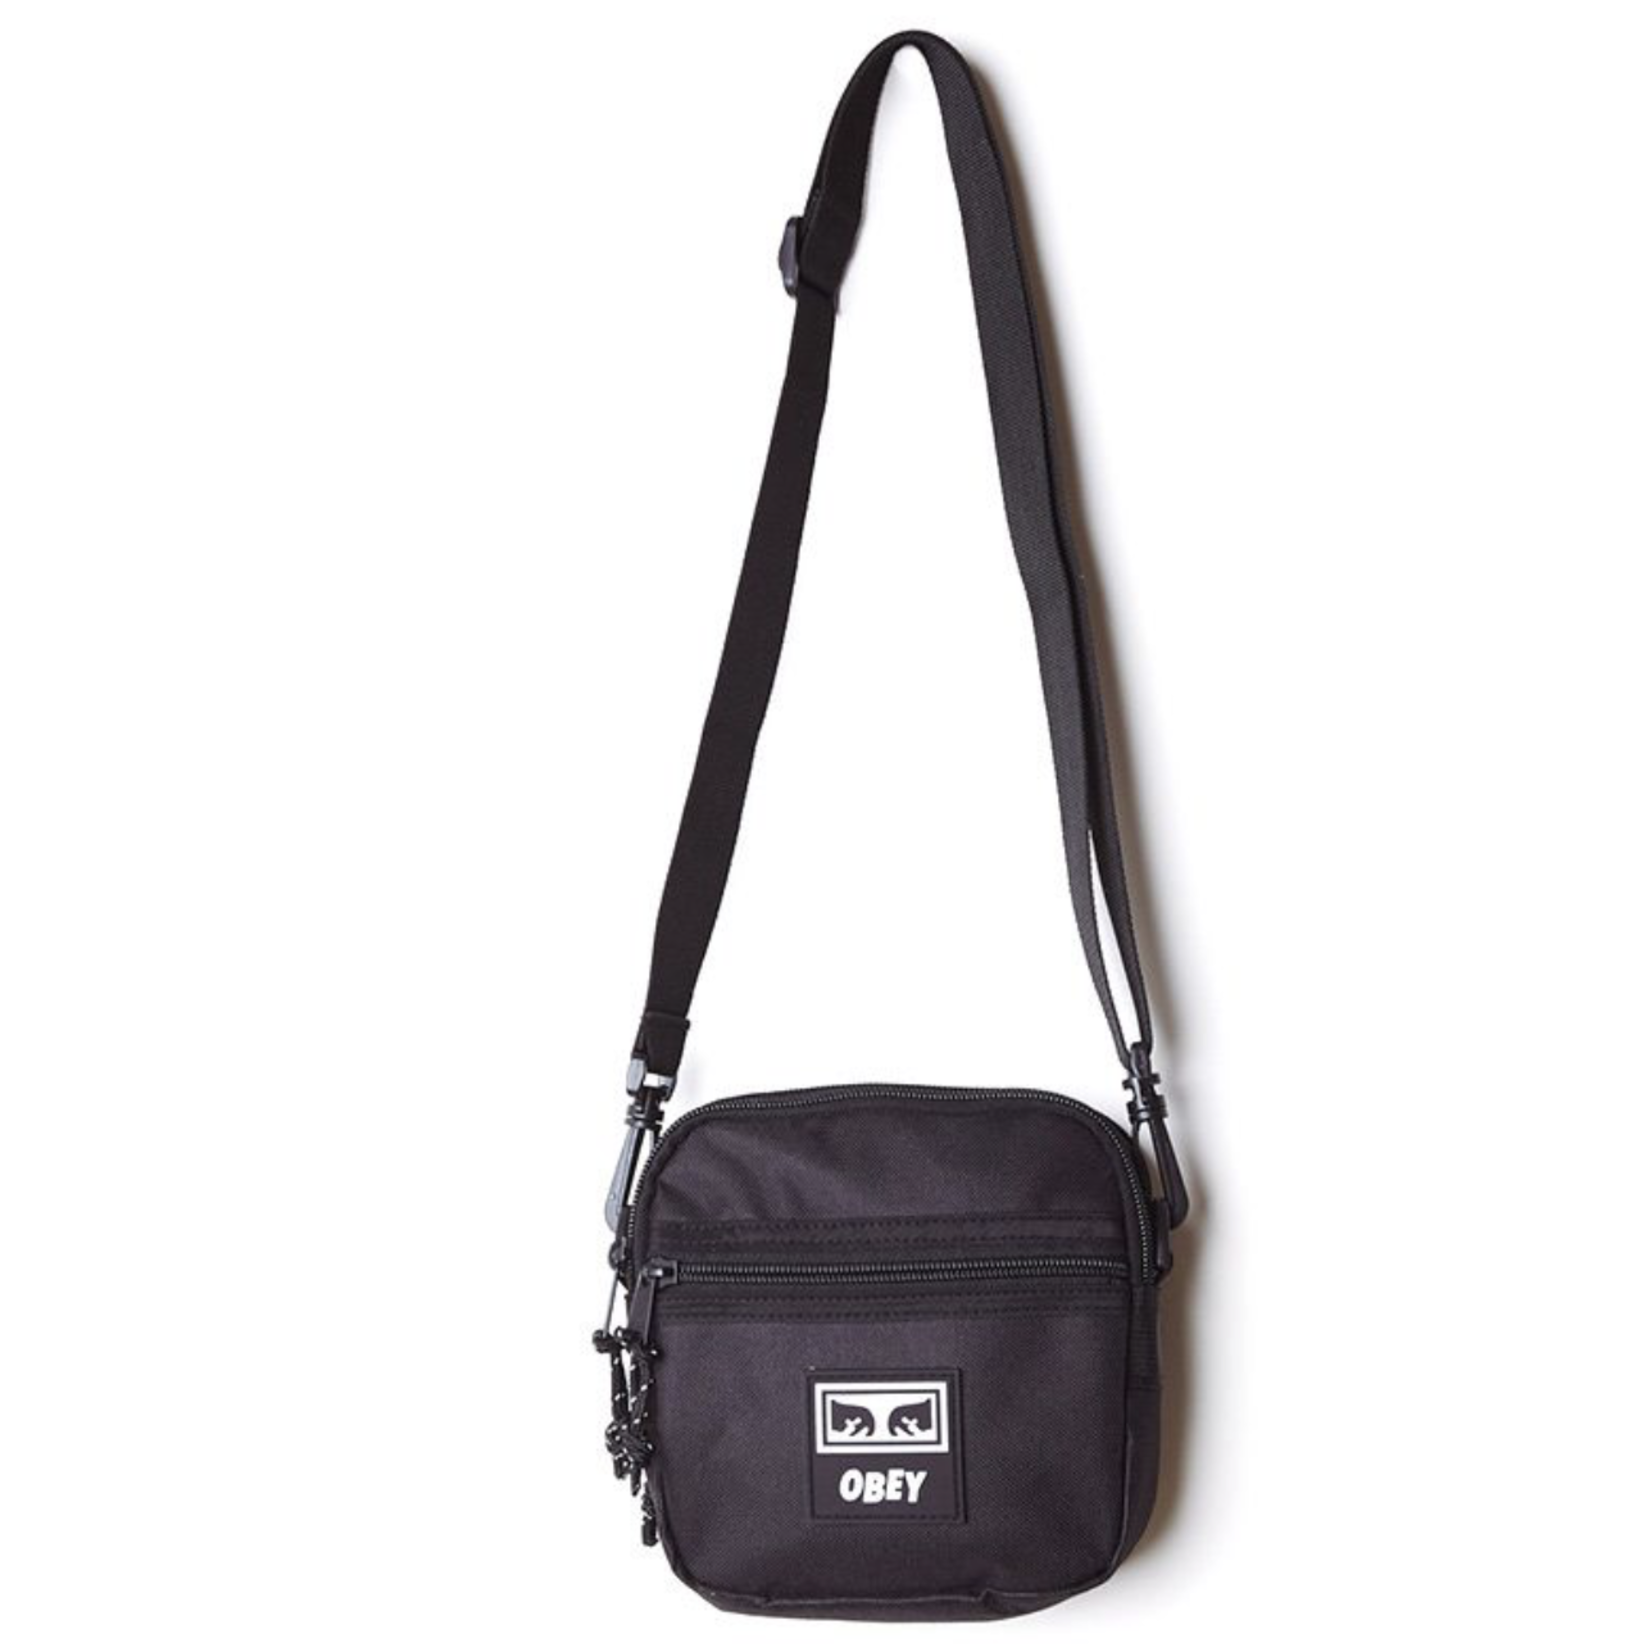 OBEY OBEY  small messenger bag